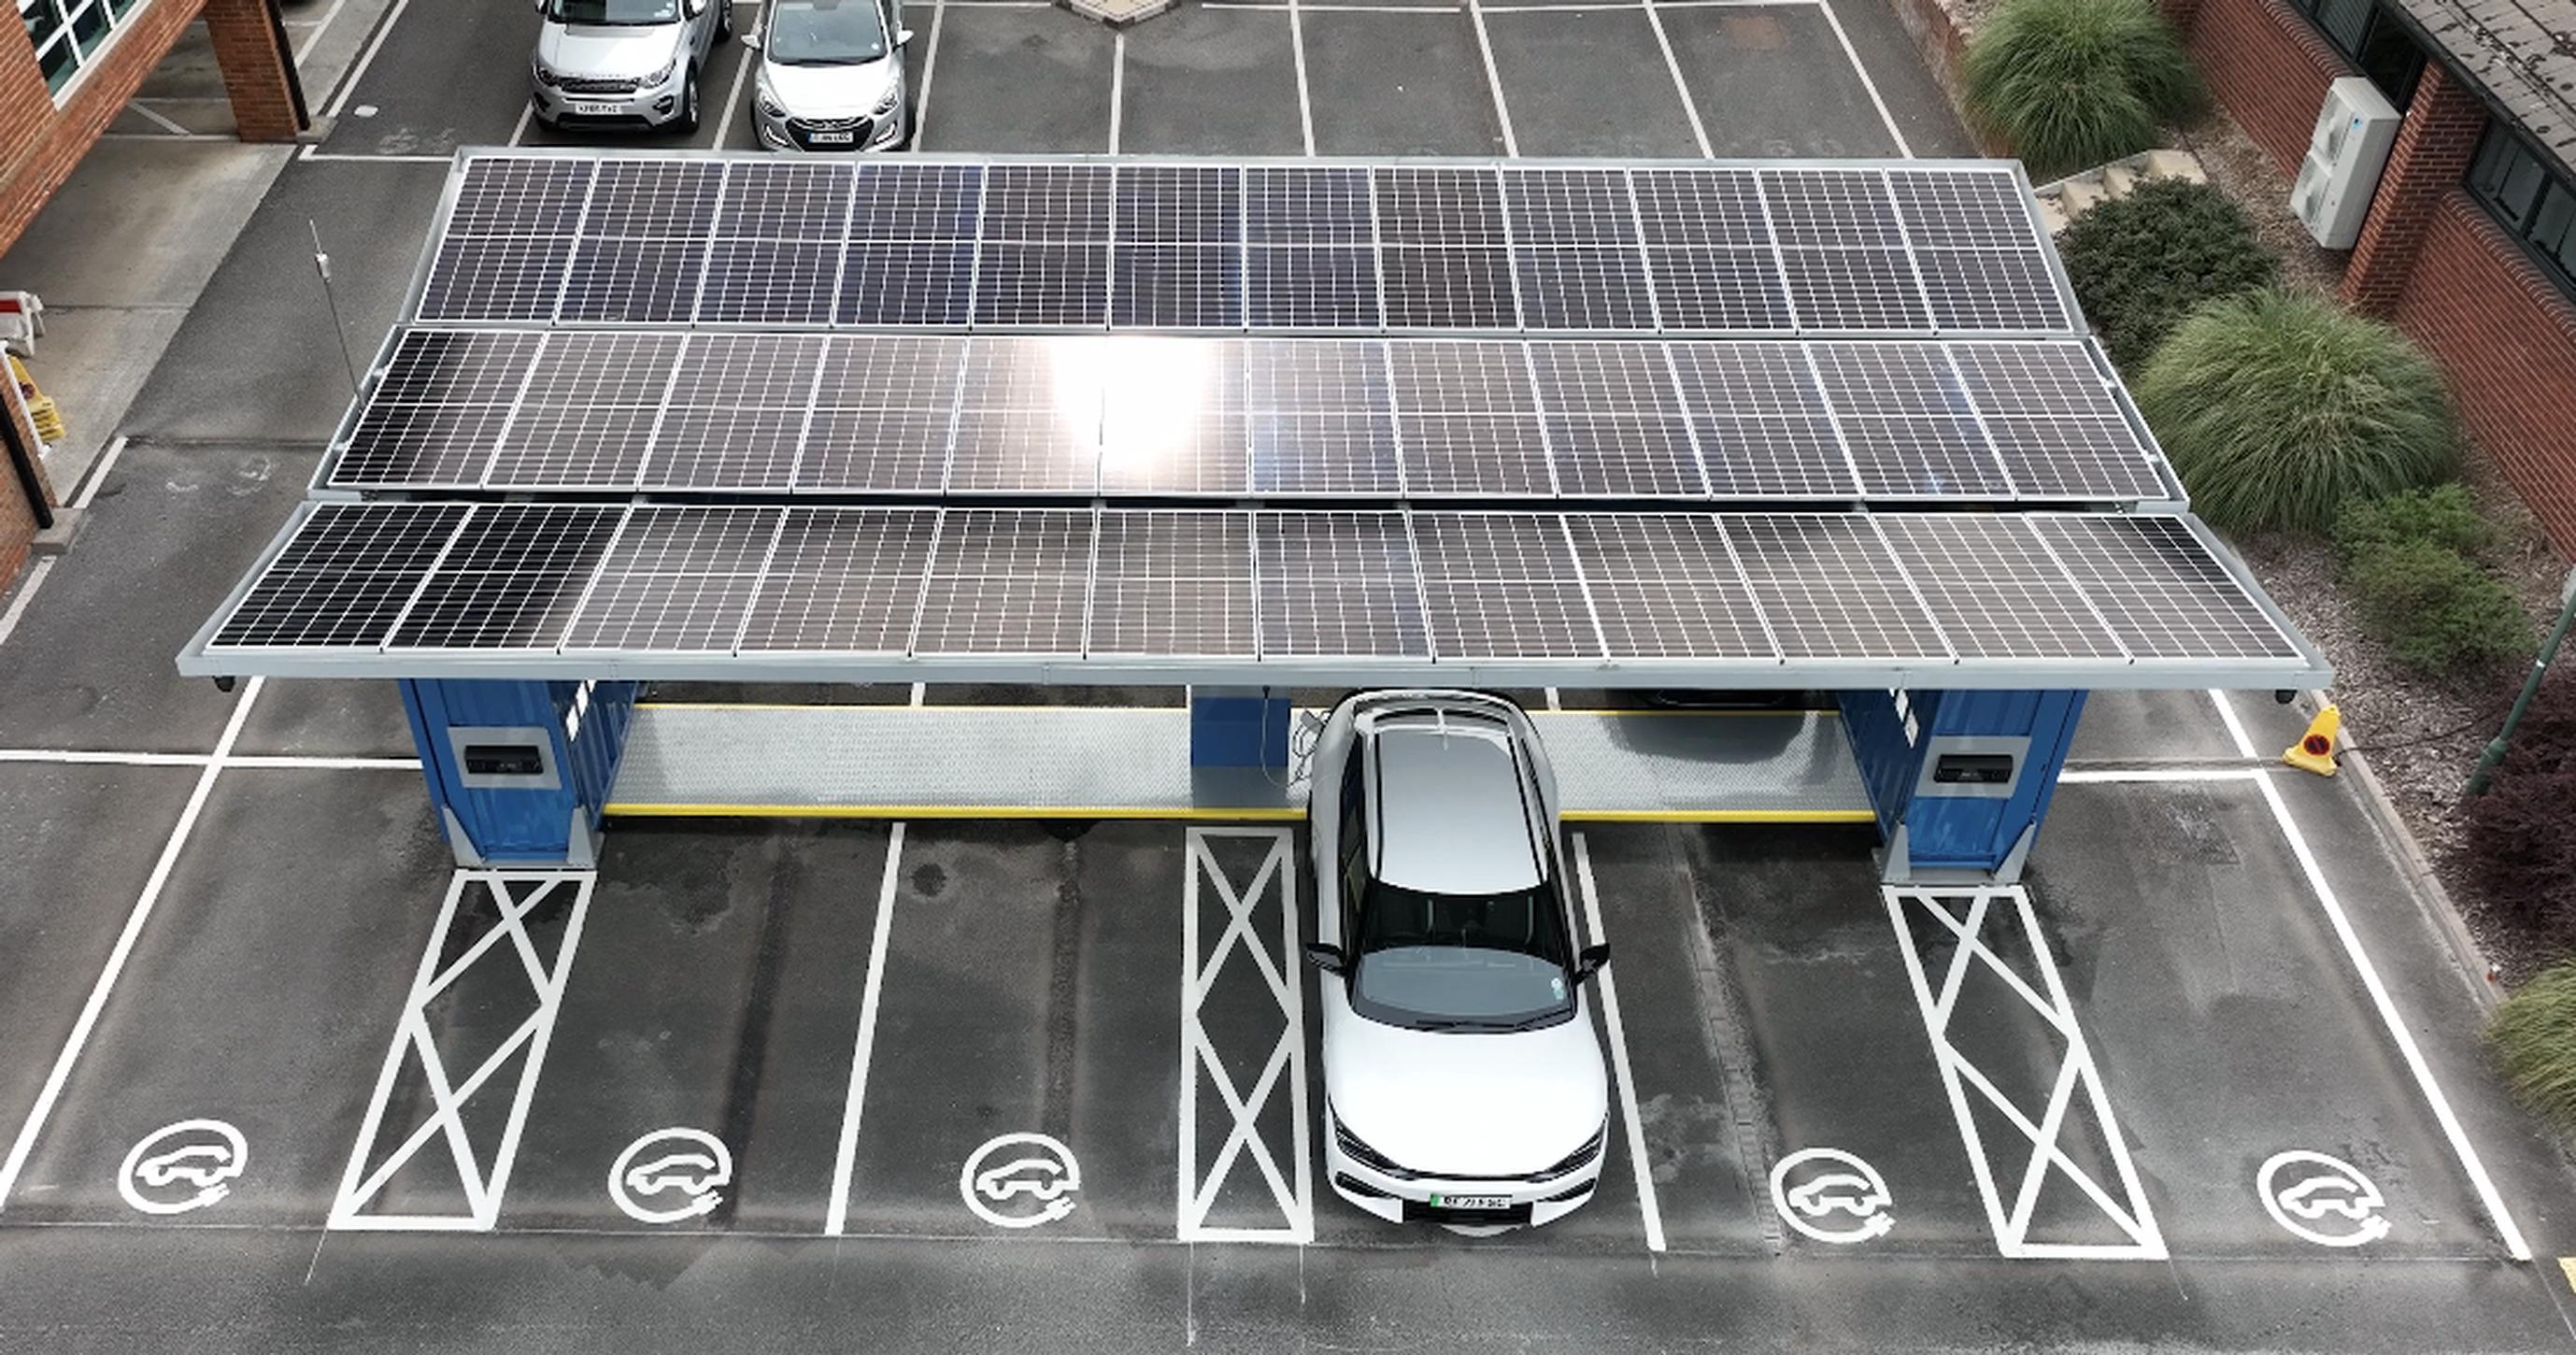 According to data captured across 3ti’s 10MWp of solar canopies installed over 2,500 UK parking spaces, each solar car park space can be expected to generate around 2.7MWh of solar energy a year